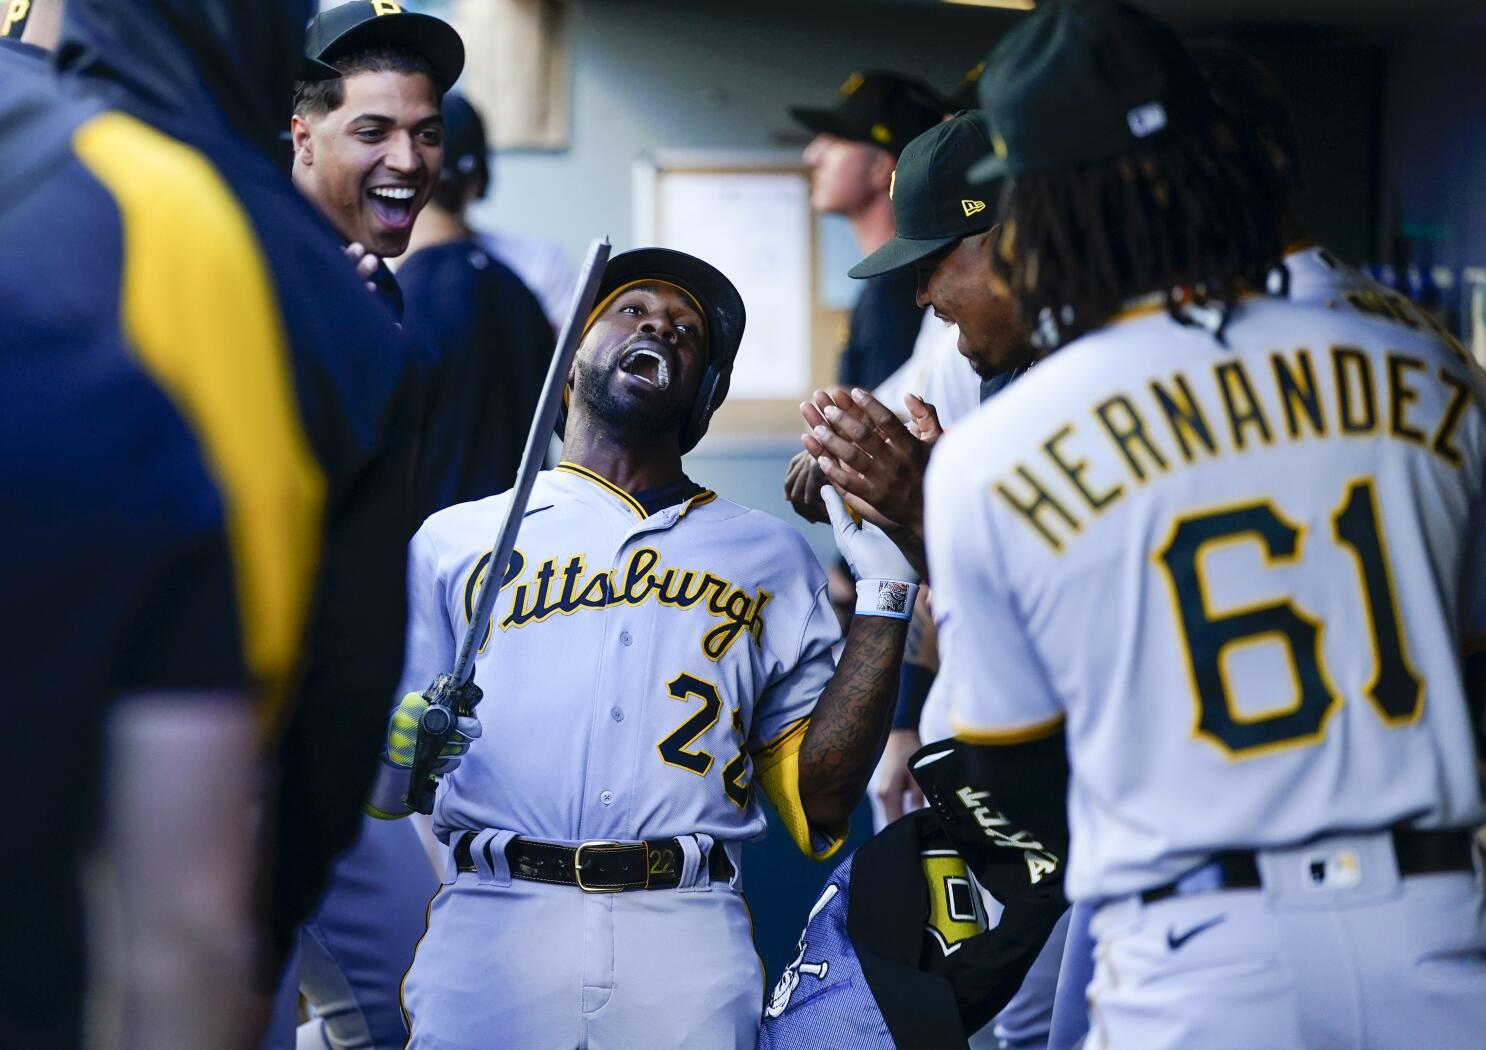 McCutchen sparks record-tying home run barrage as Pirates sink Mariners  11-6 - The San Diego Union-Tribune